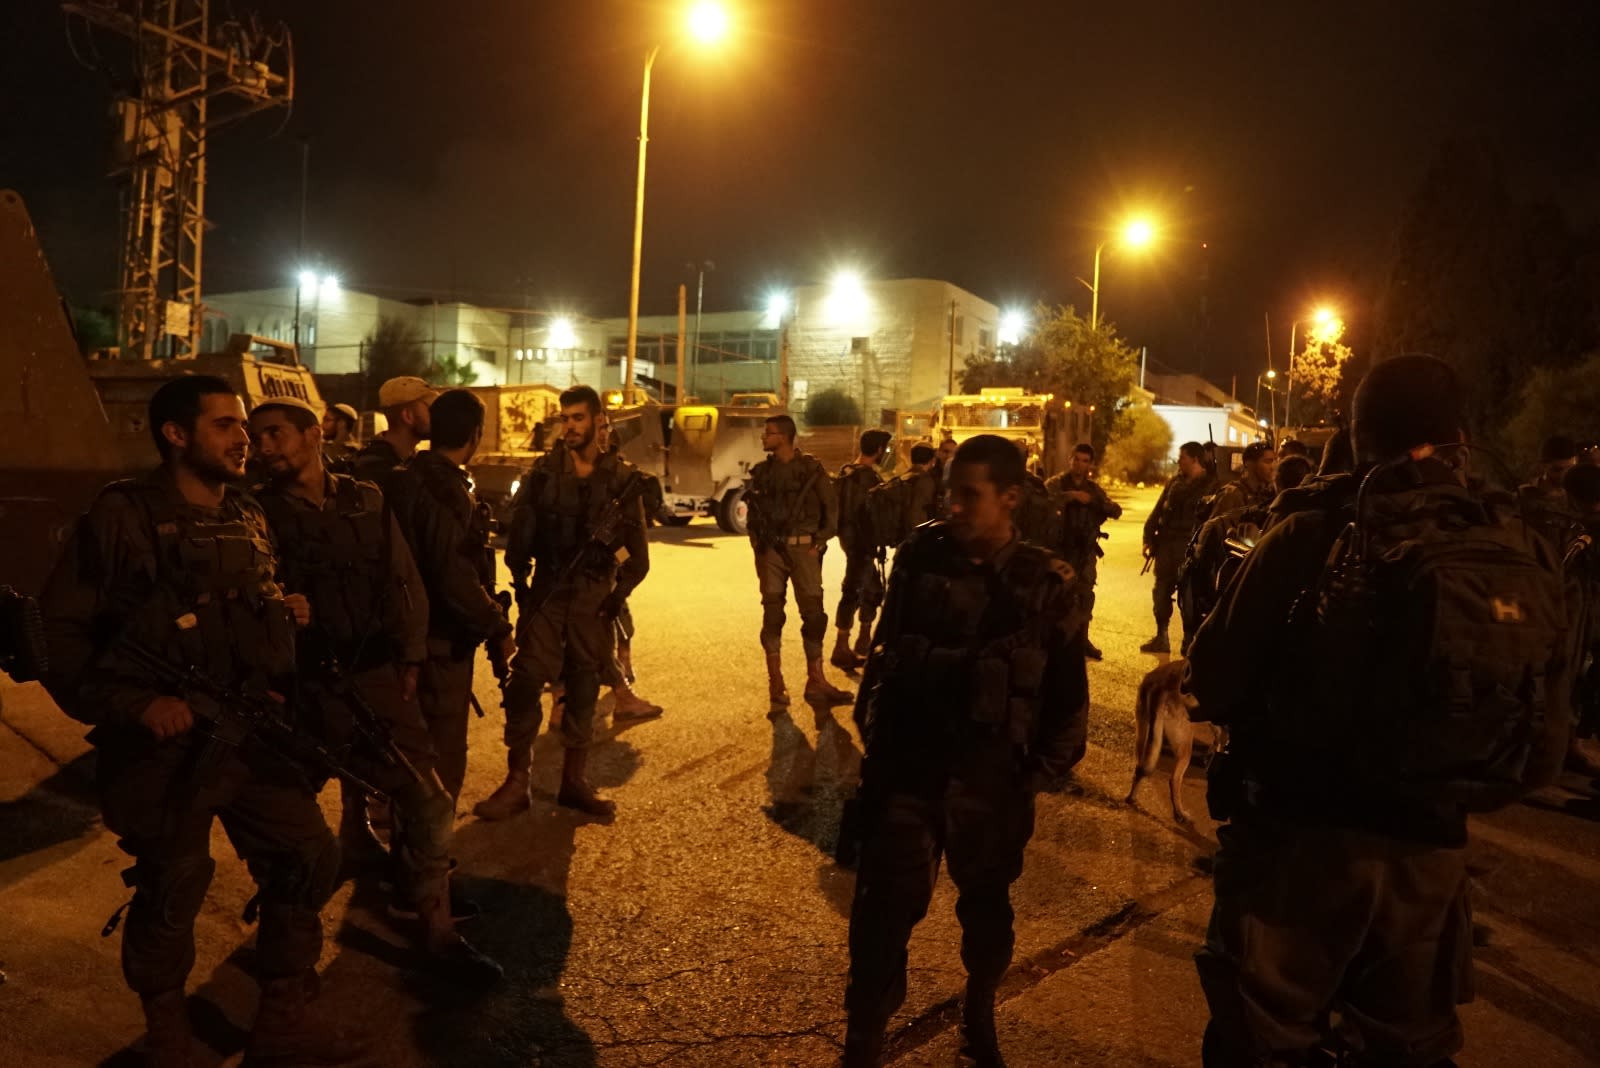 IDF soldiers seen during overnight activity following Thursday's stabbing attack, July 28, 2018 (IDF SPOKESPERSON'S UNIT)